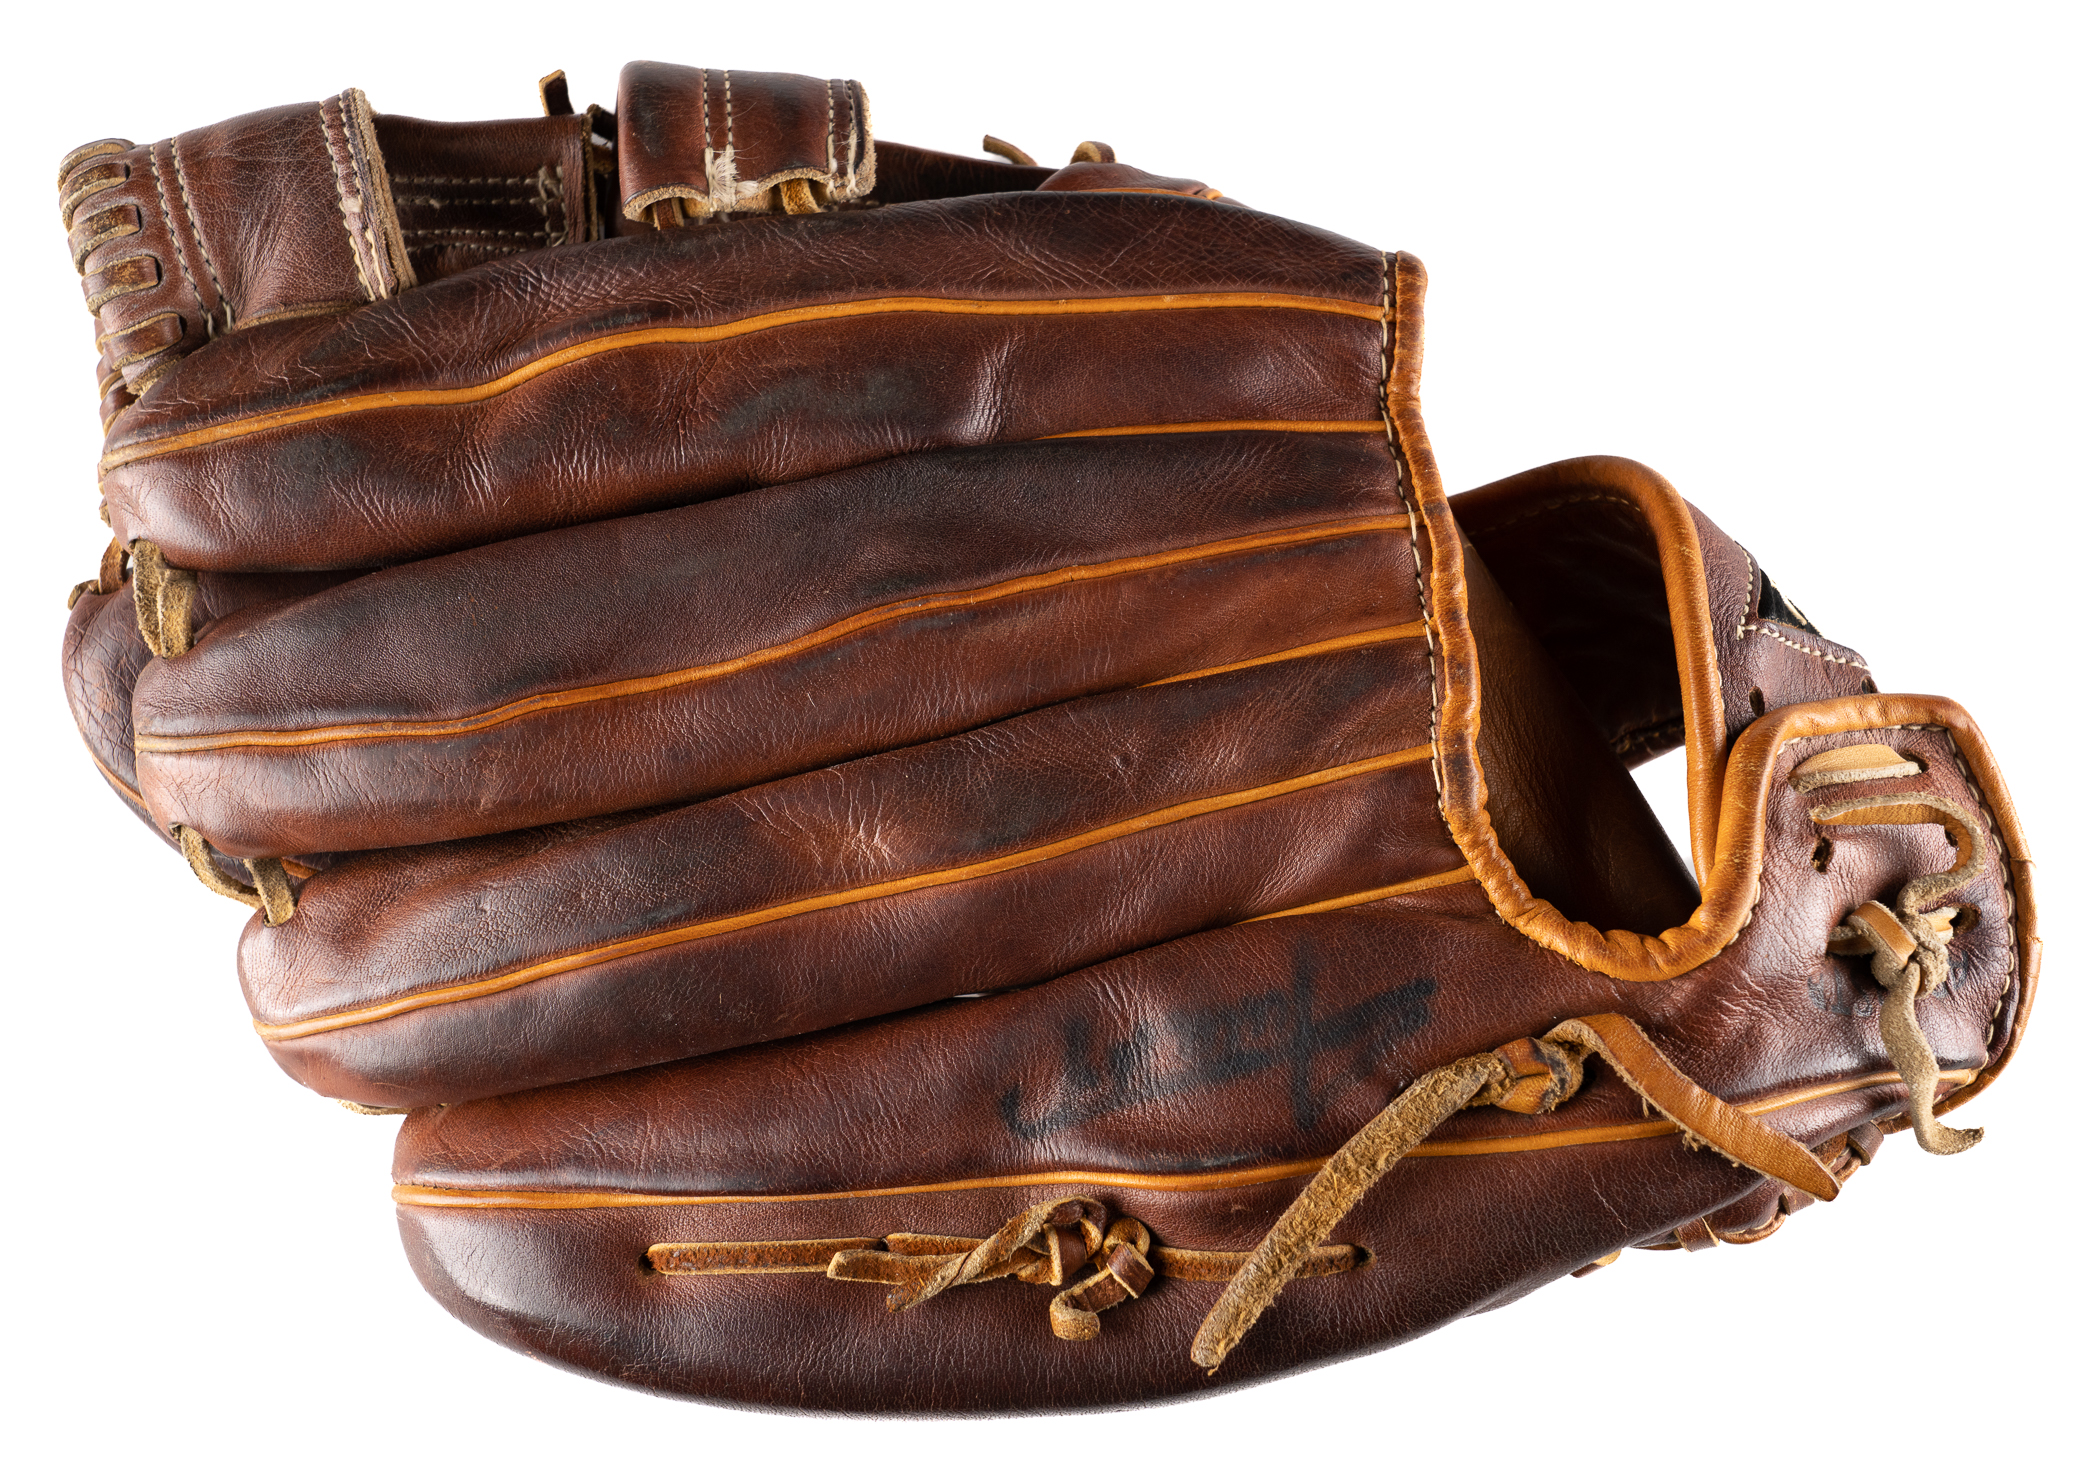 Hardy has held on to the Mays glove for more than 50 years and is now consigning it in REA's 2023 Summer Catalog Auction